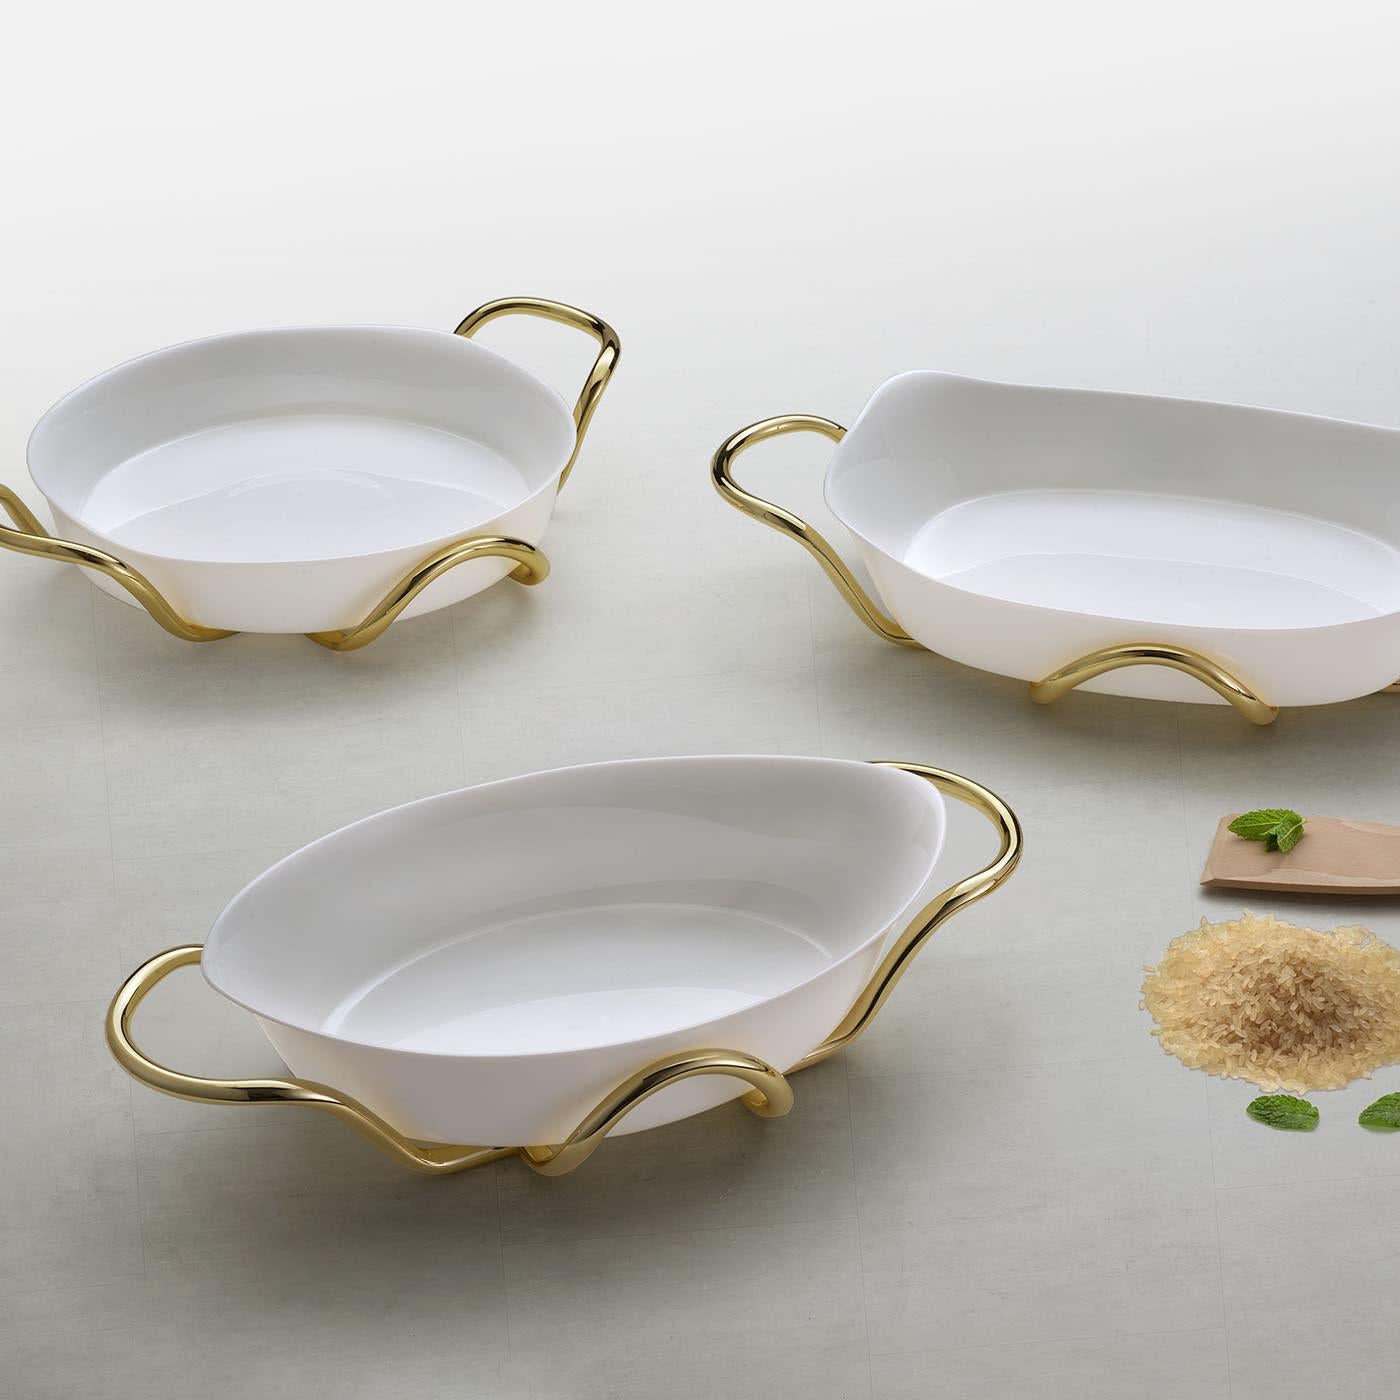 An ode to contemporary elegance, this white ceramic baking dish with cylindrical golden-finished brass holders boasts seductive curves and fluid lines. Practical handles are incorporated within the sinuous holder's structure, which sports a warm and